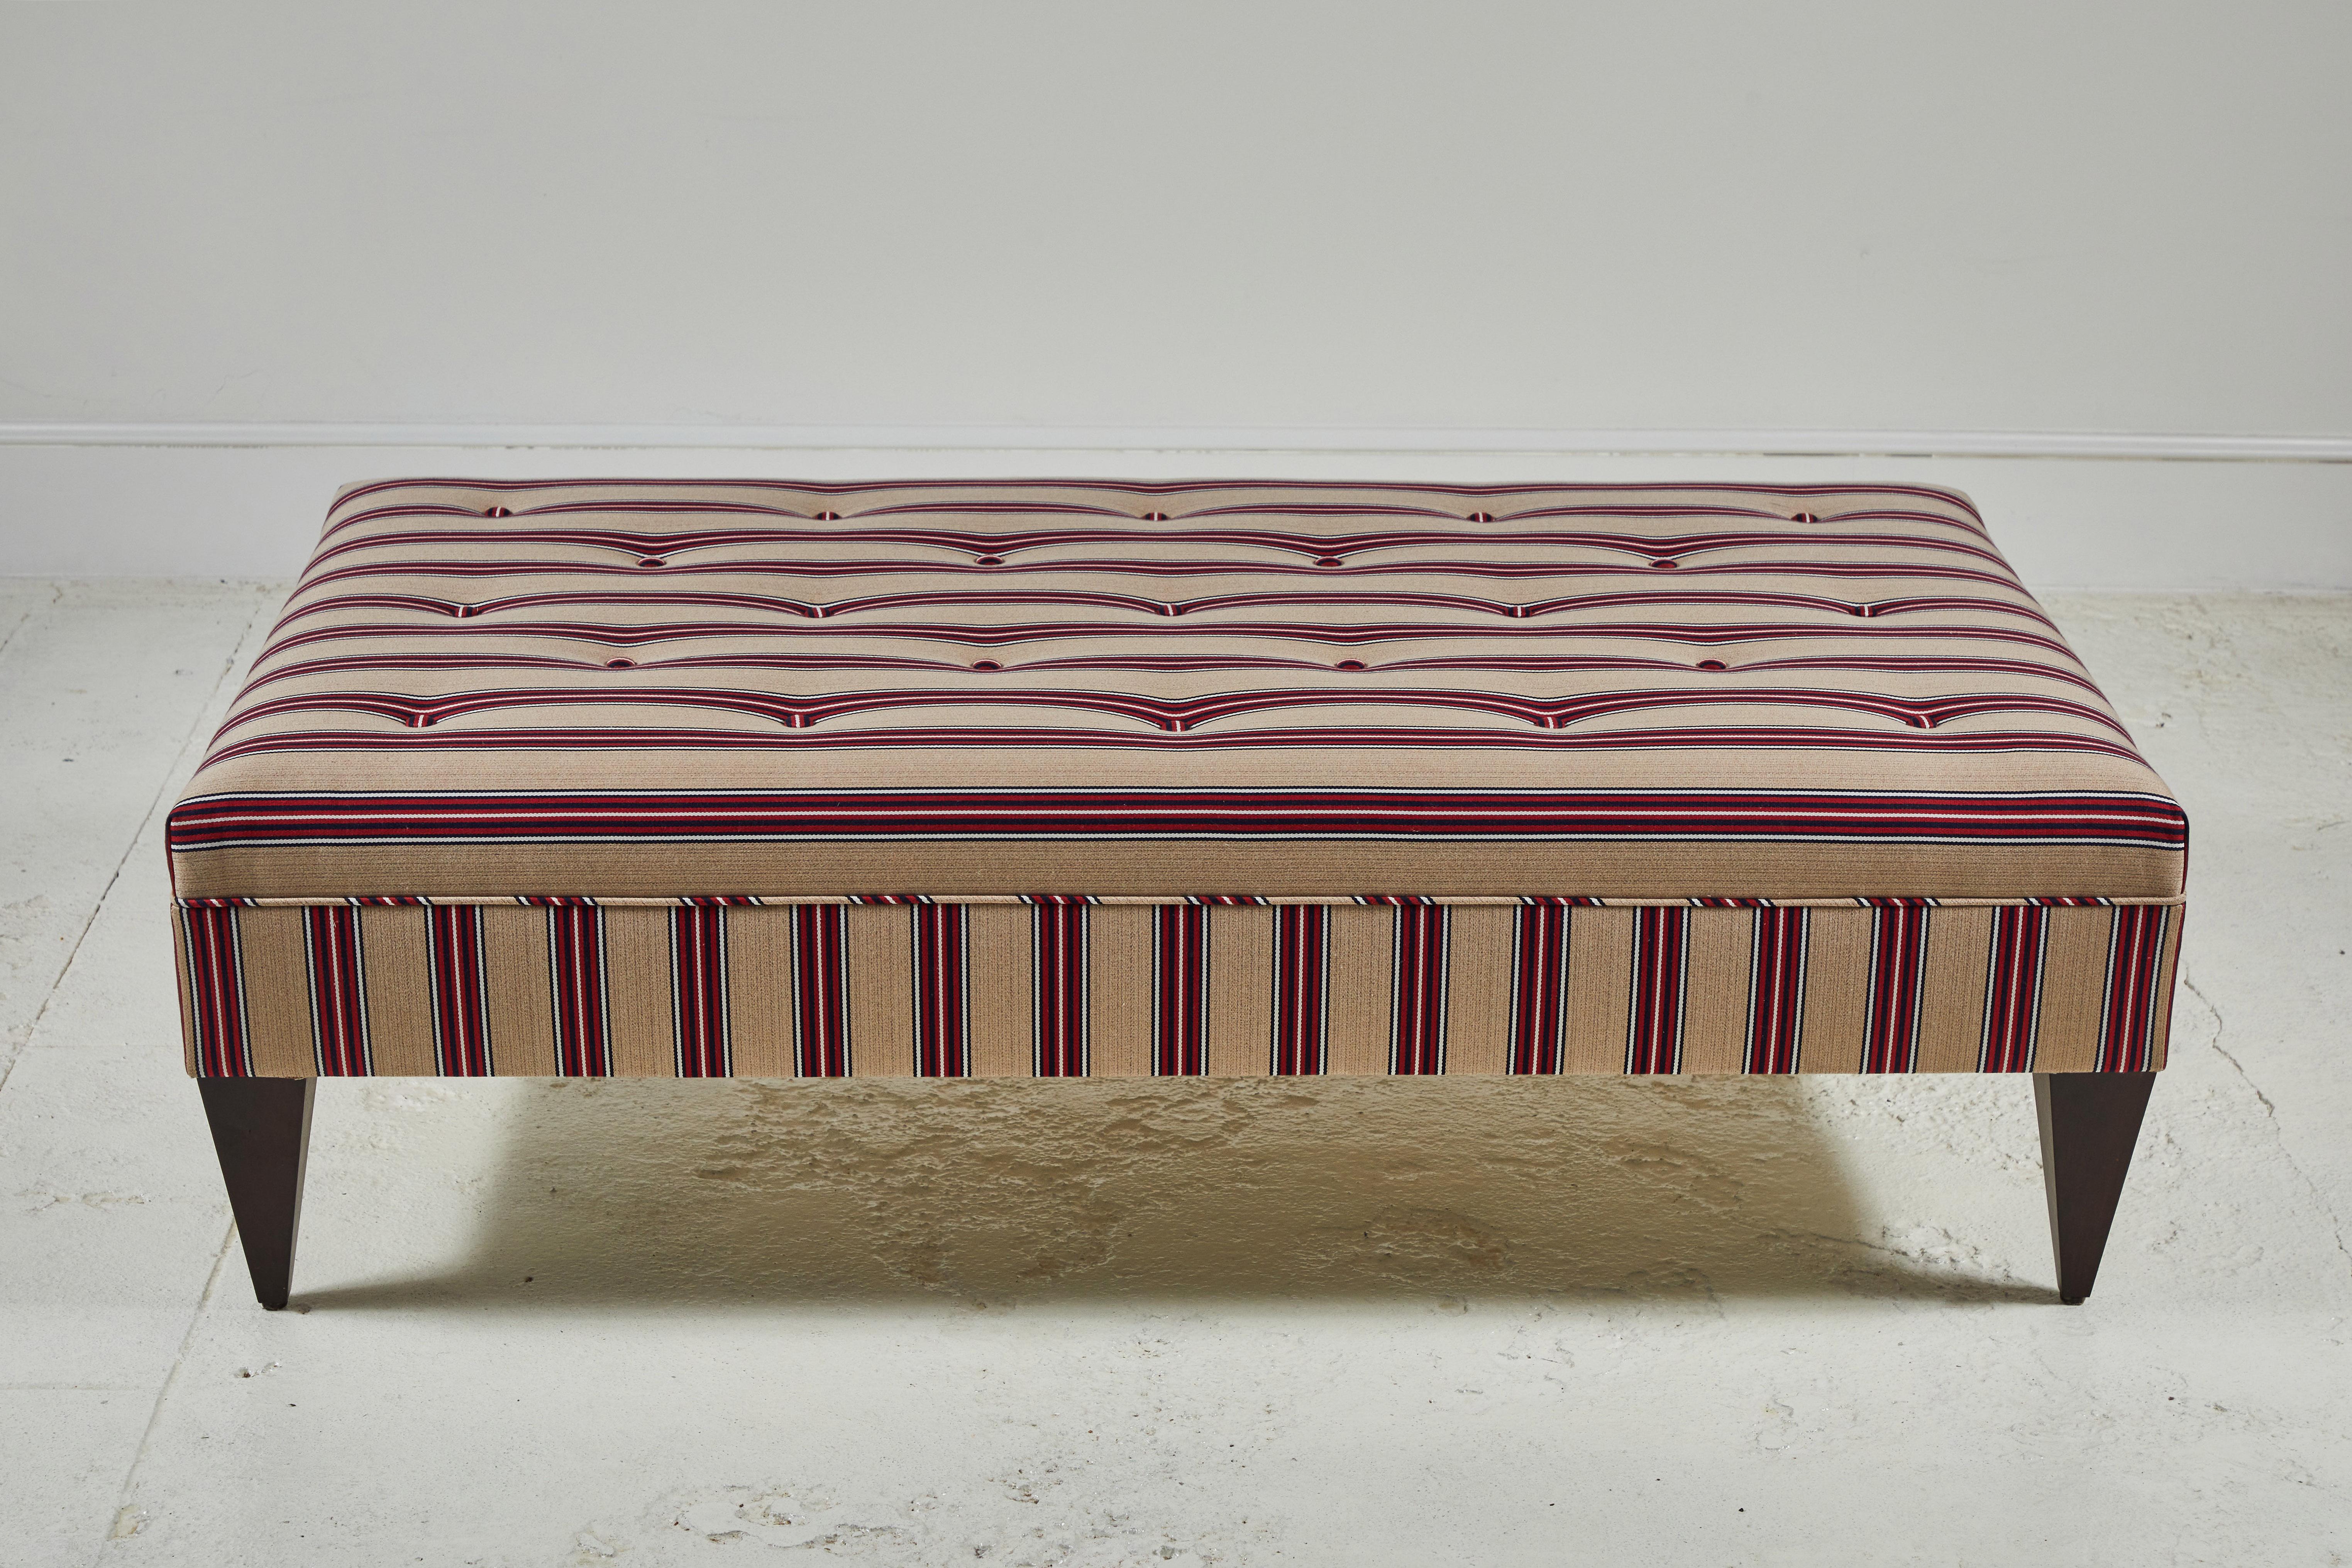 Simple and straight forward ottoman with tufting along the top, and one row of piping. Finished off with tapered legs. This specific ottoman is upholstered in striped fabric from UK textile company, Howe.